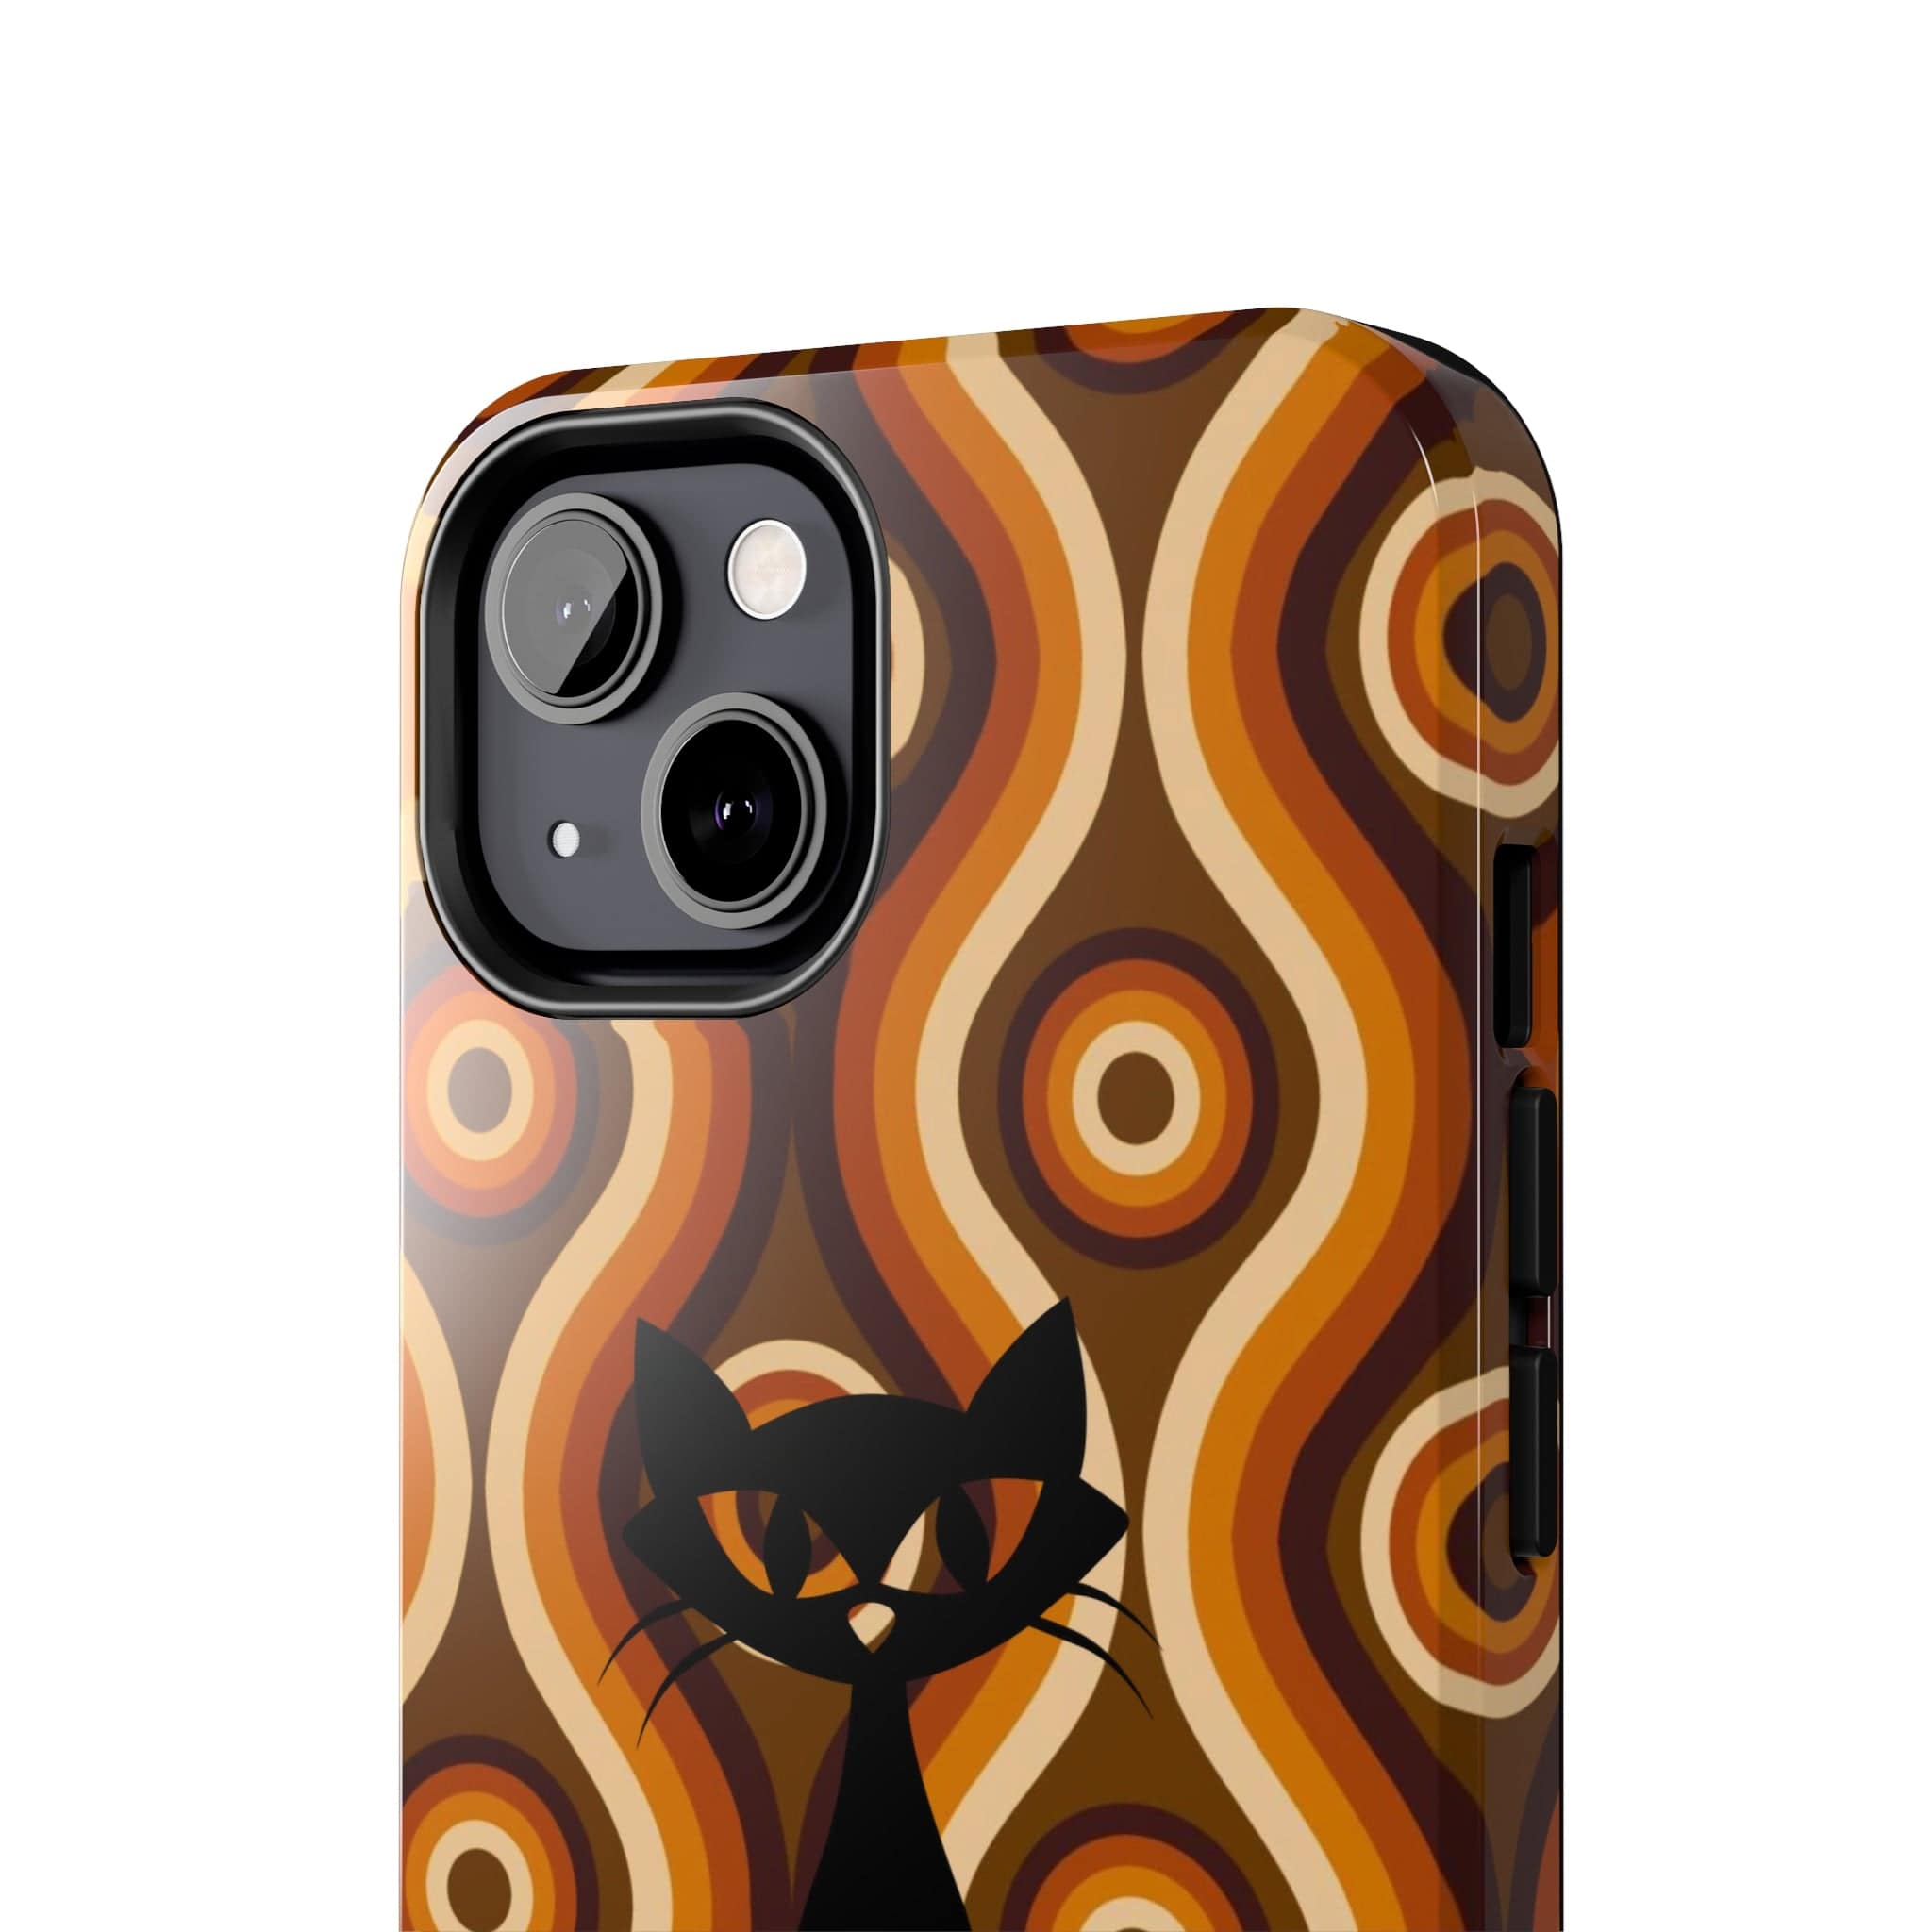 Retro Phone Case, Groovy Brown, Atomic Kitsch Cat Tough Smart Phone Cases Phone Case